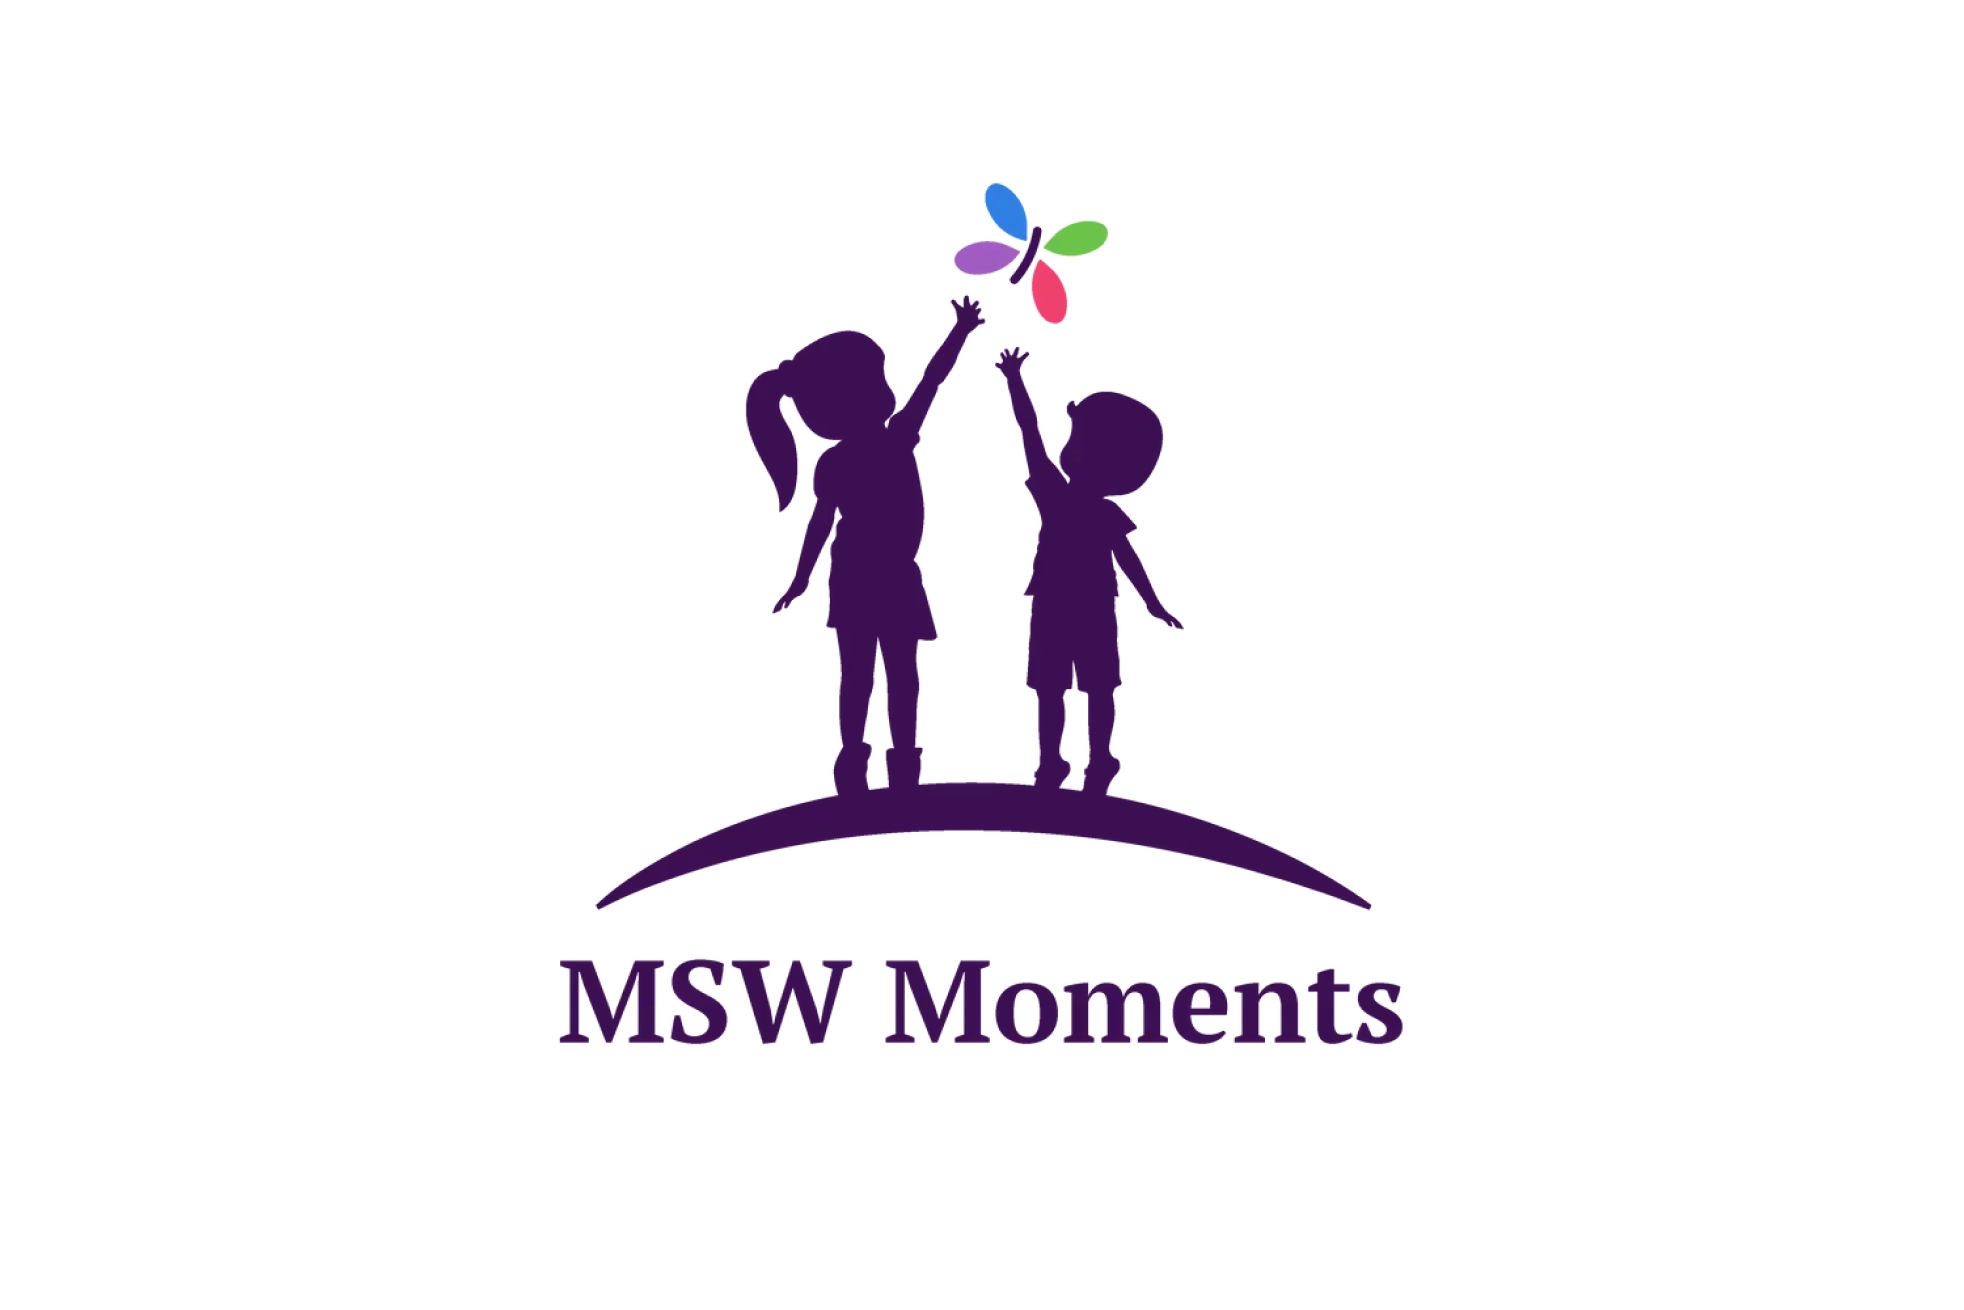 MSW Moments logo'.